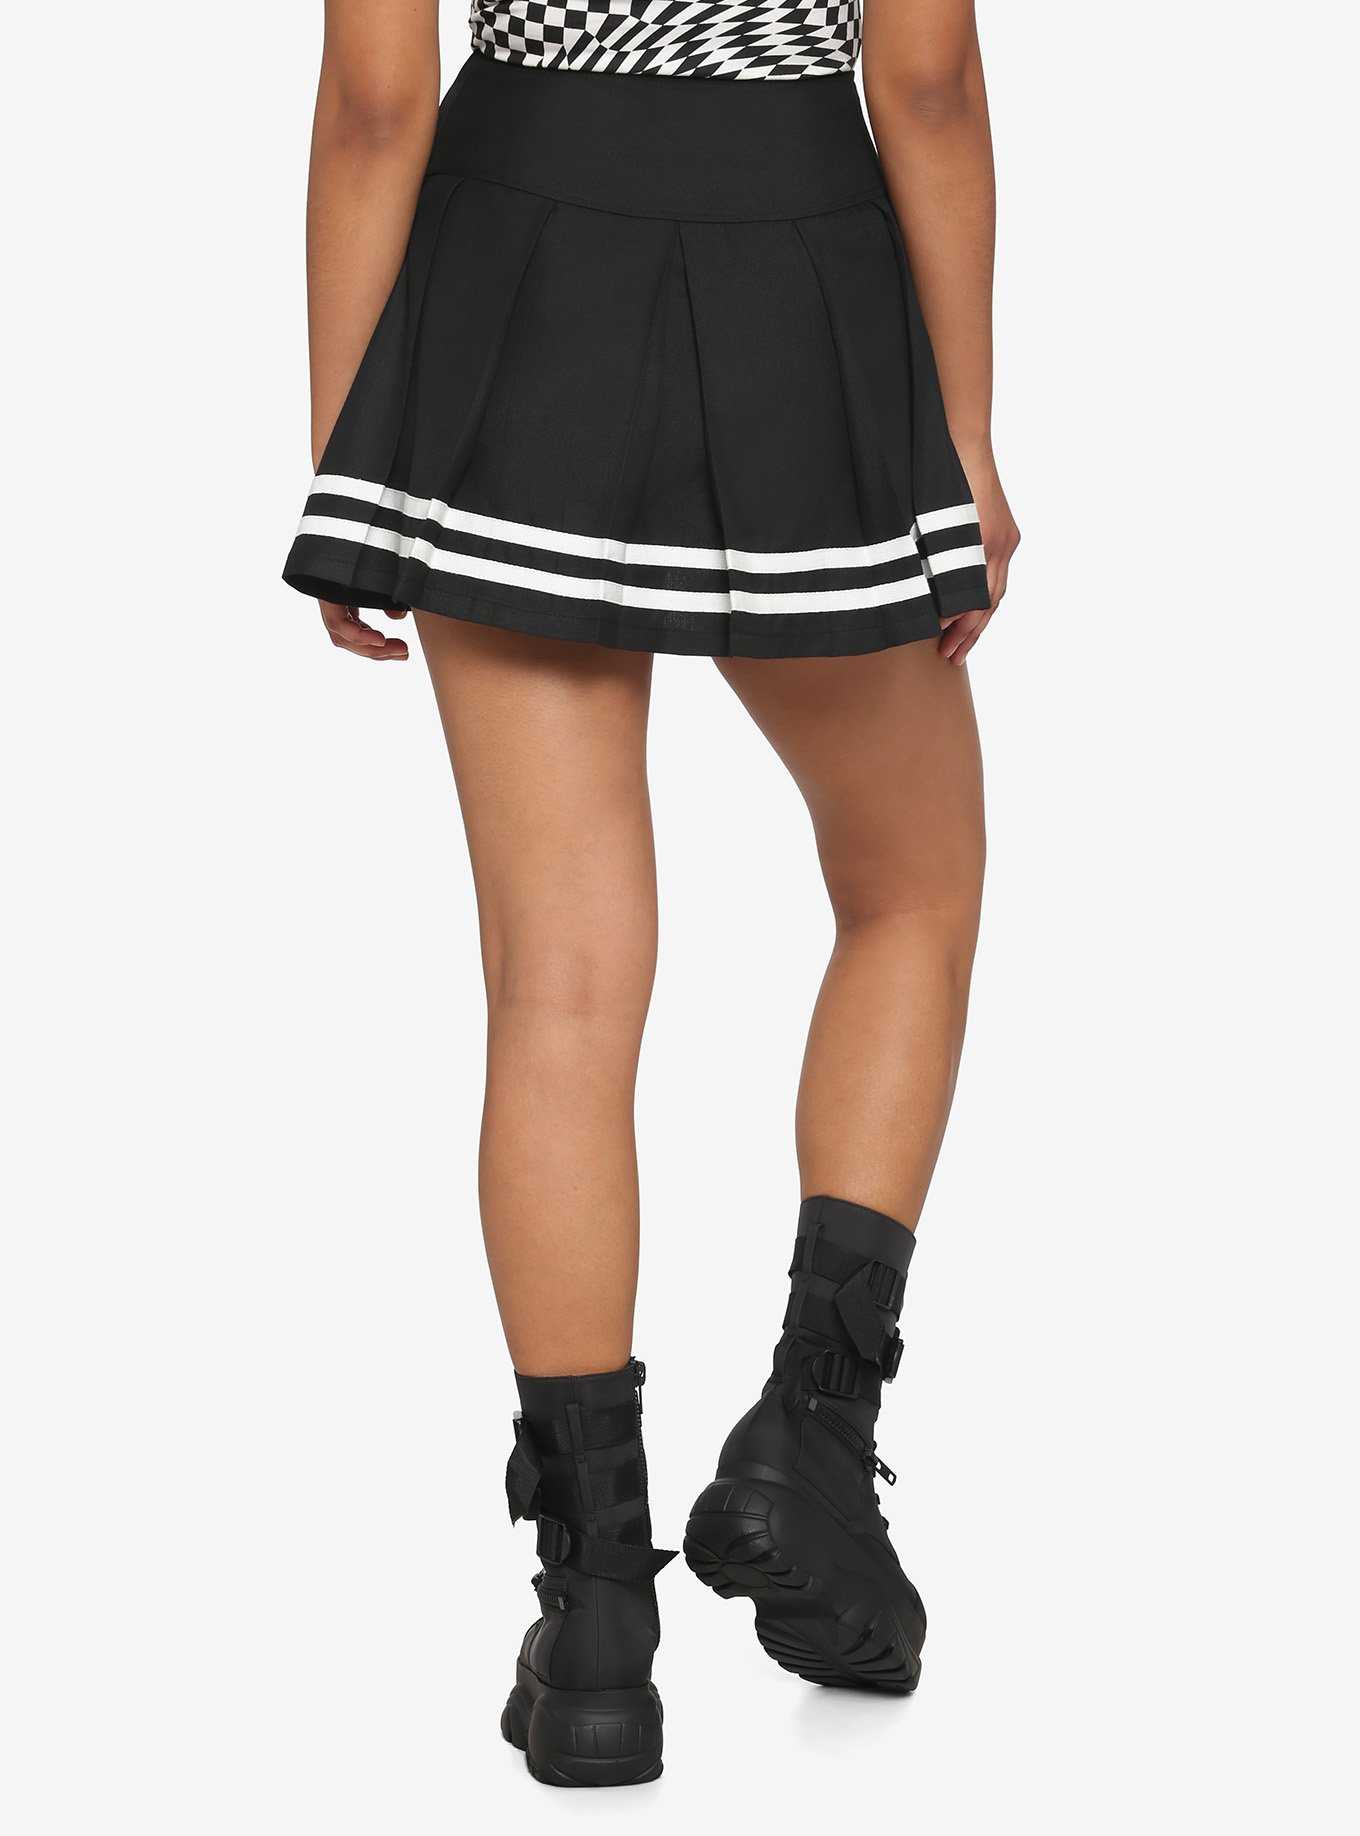 Black & White Lace-Up Pleated Skirt, , hi-res